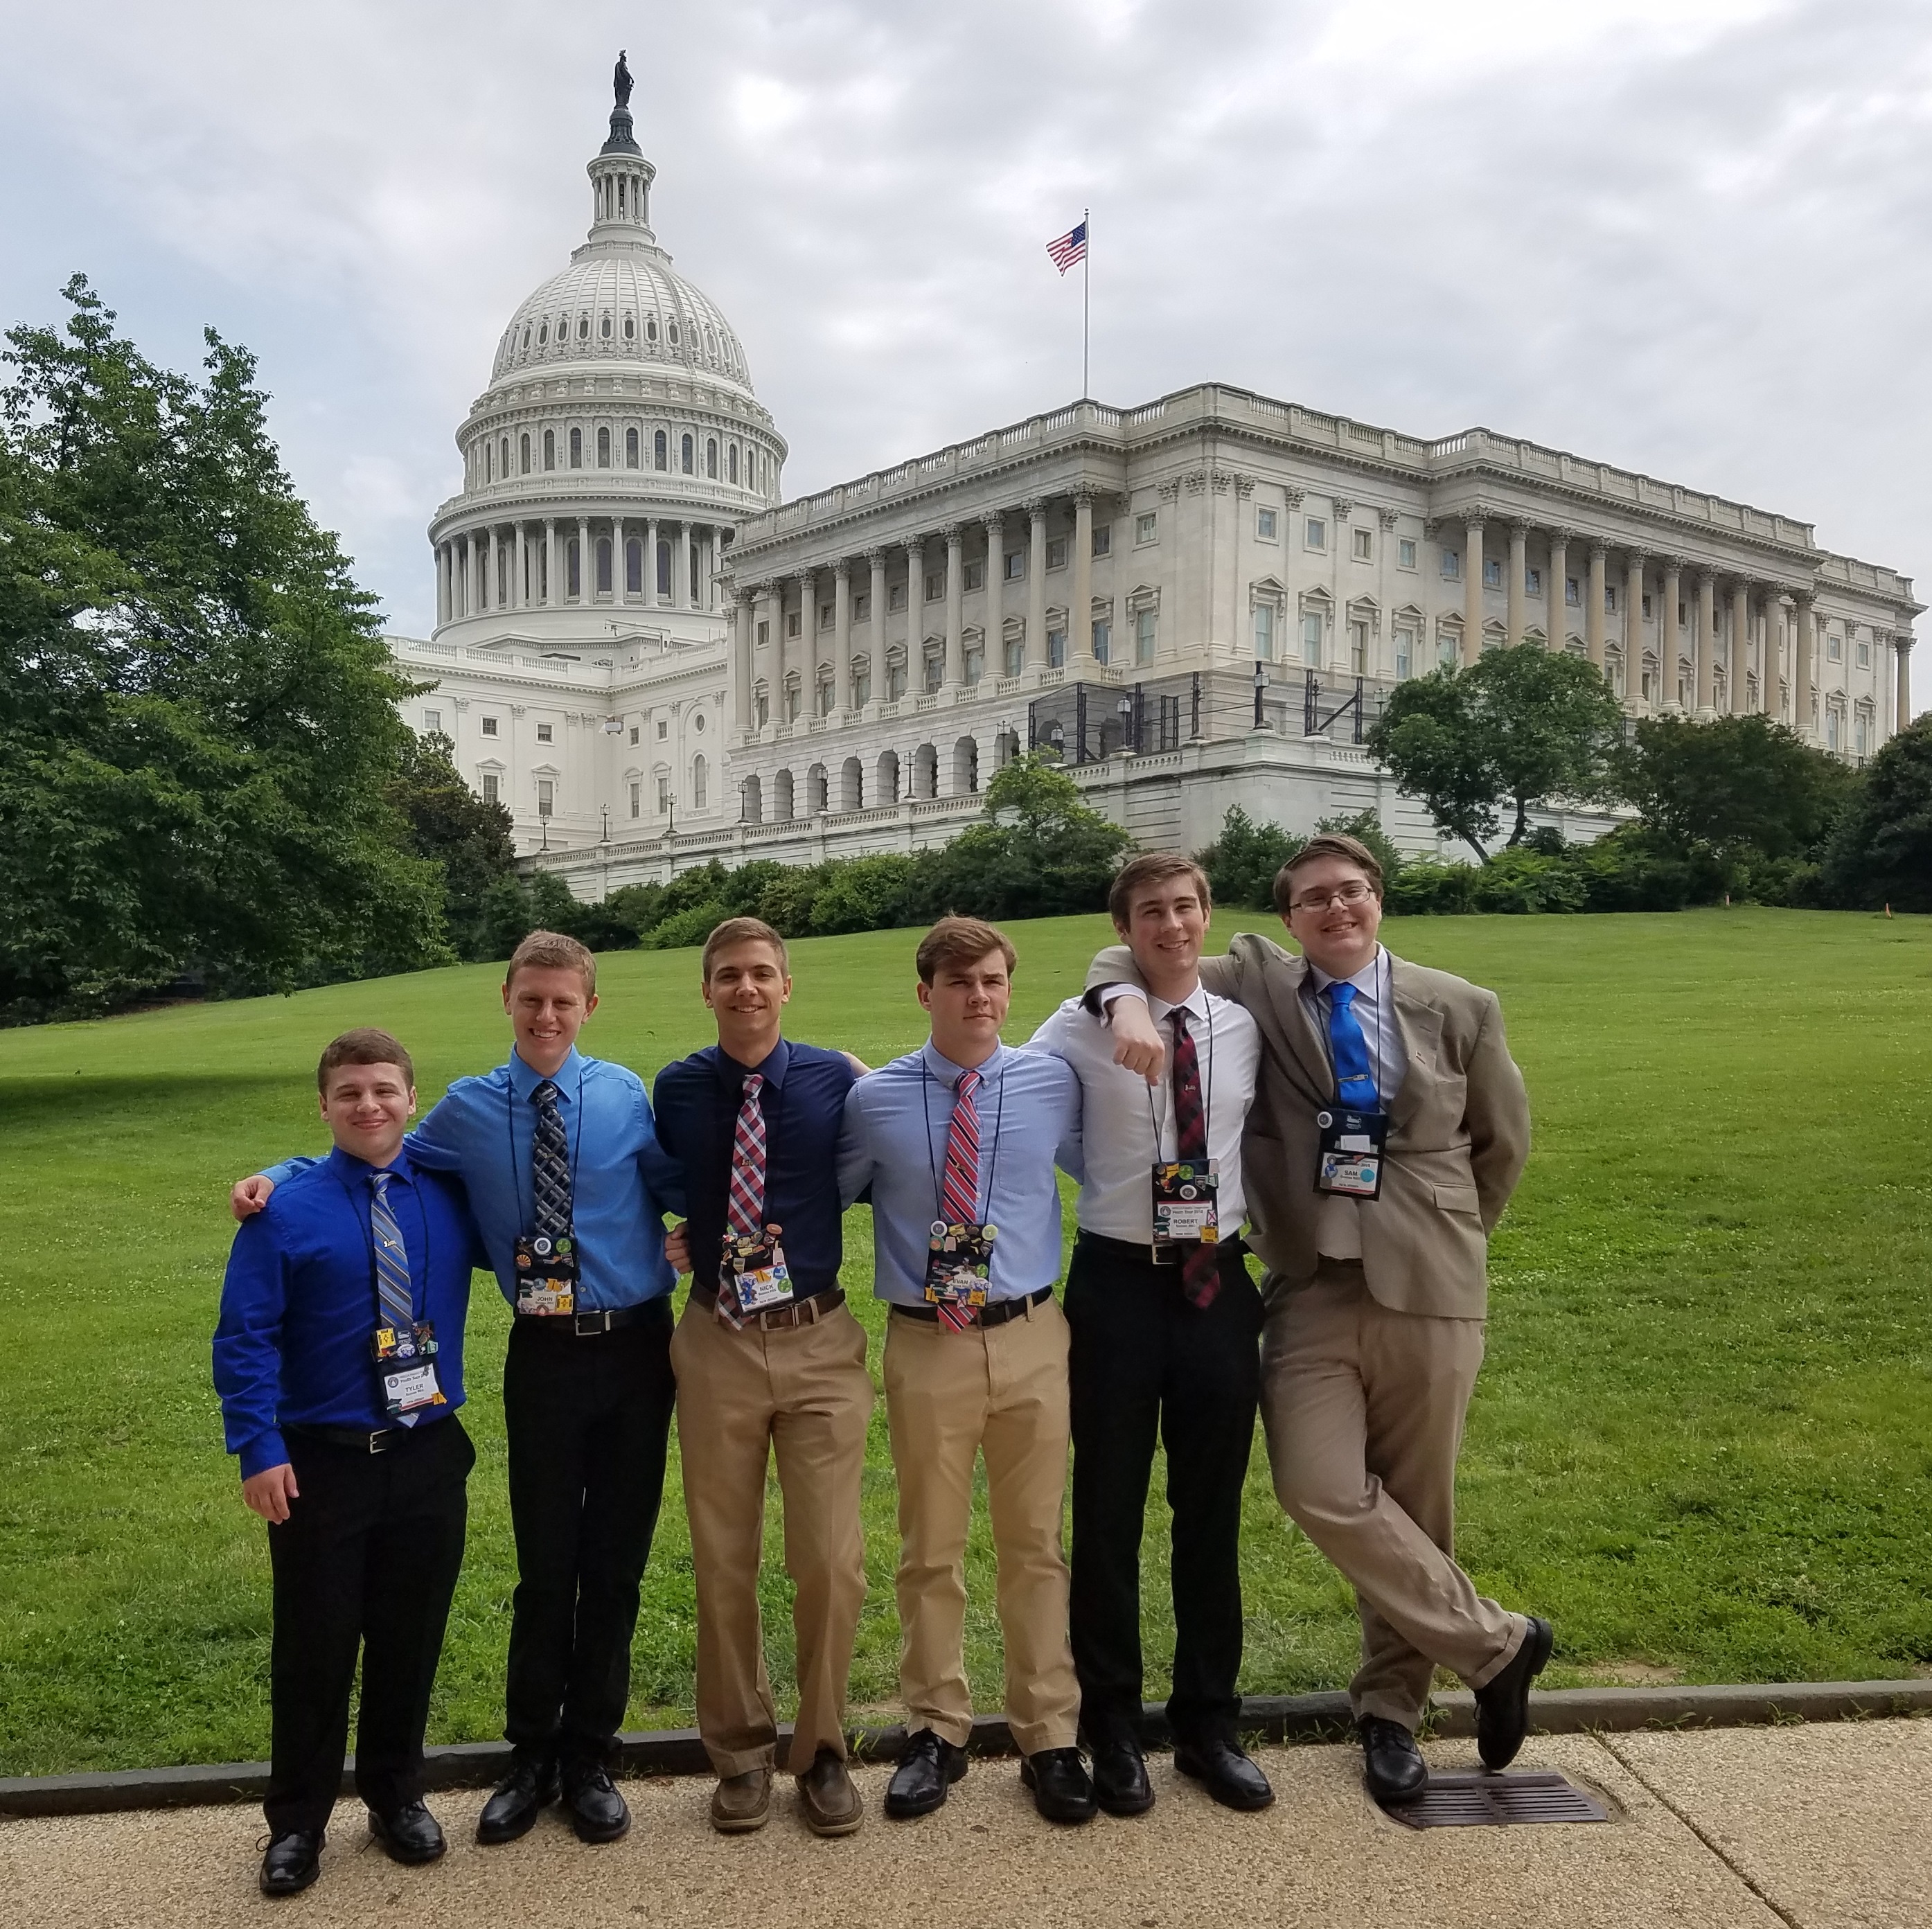 A group of New Jersey students on Youth Tour in 2018 post together in front of the Capitol building